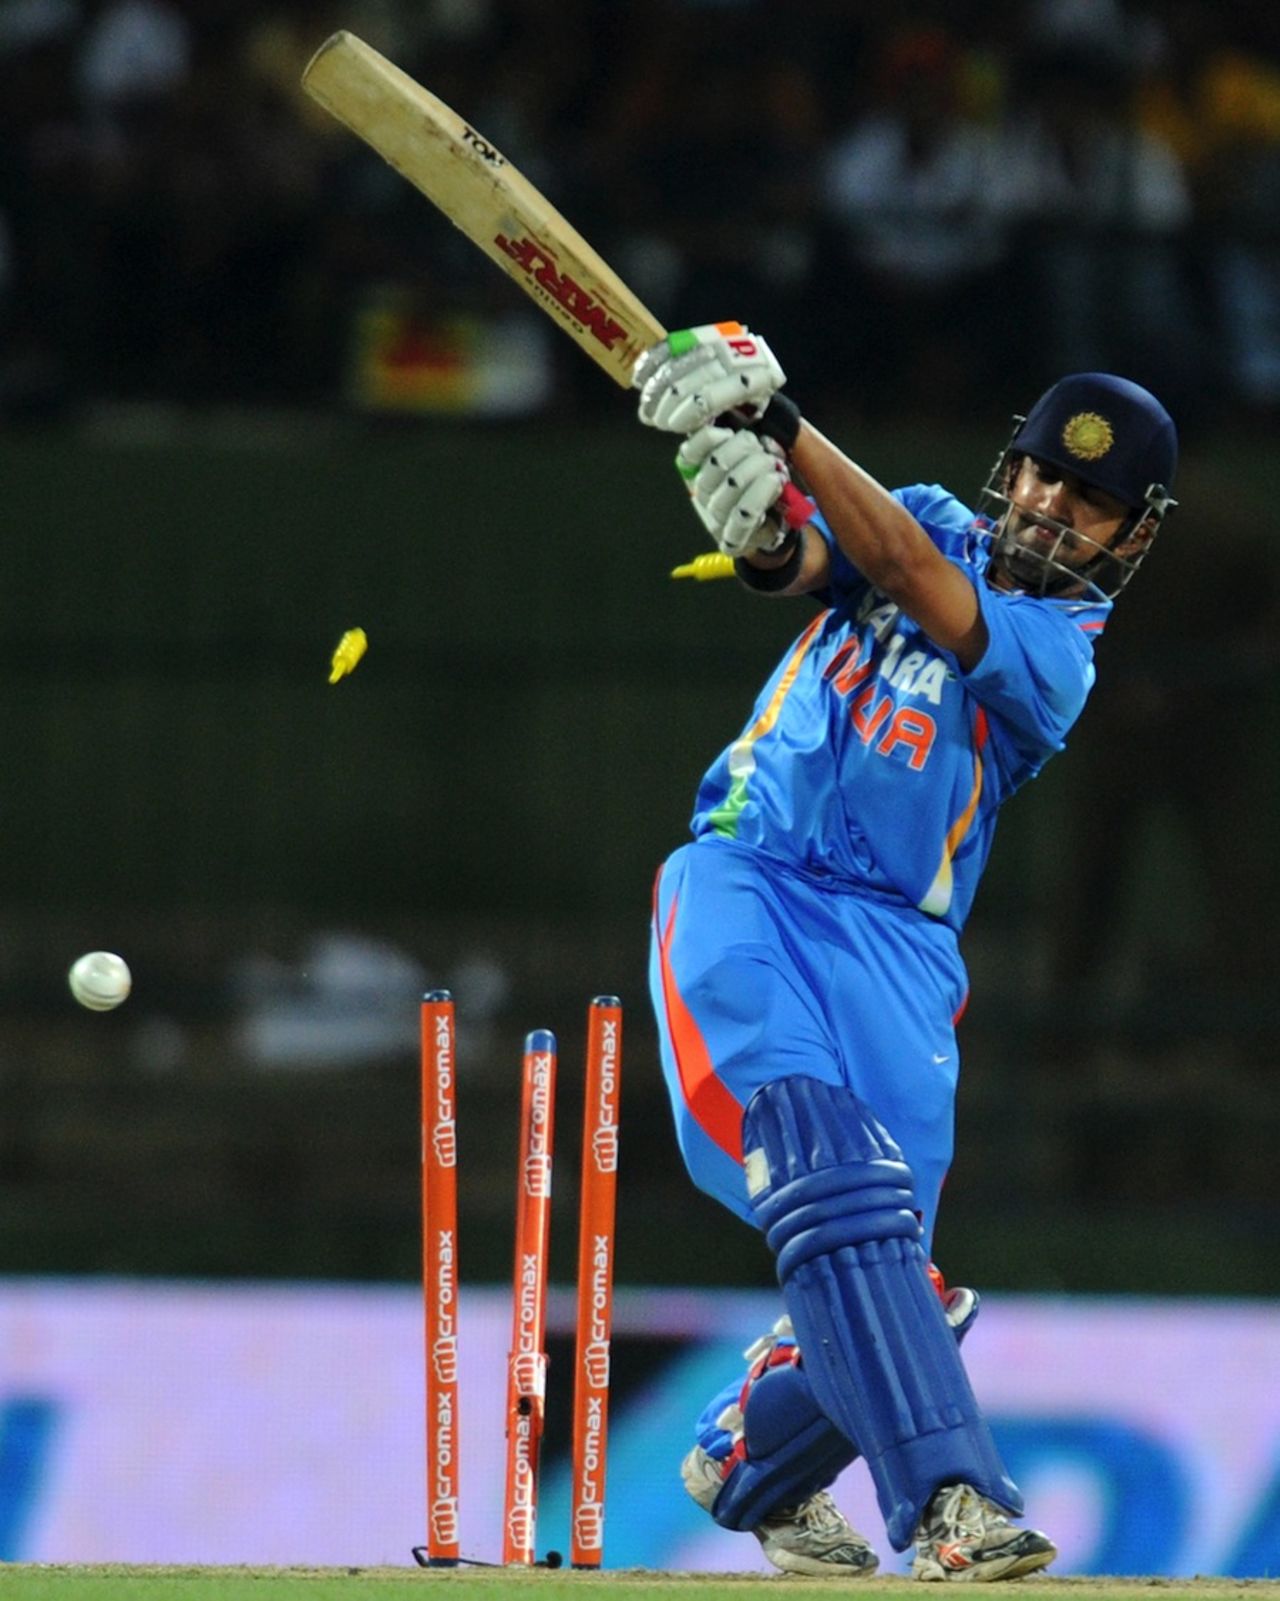 Gautam Gambhir missed a ball to be out bowled, Sri Lanka v India, Only T20I, Pallekele. August 7, 2012